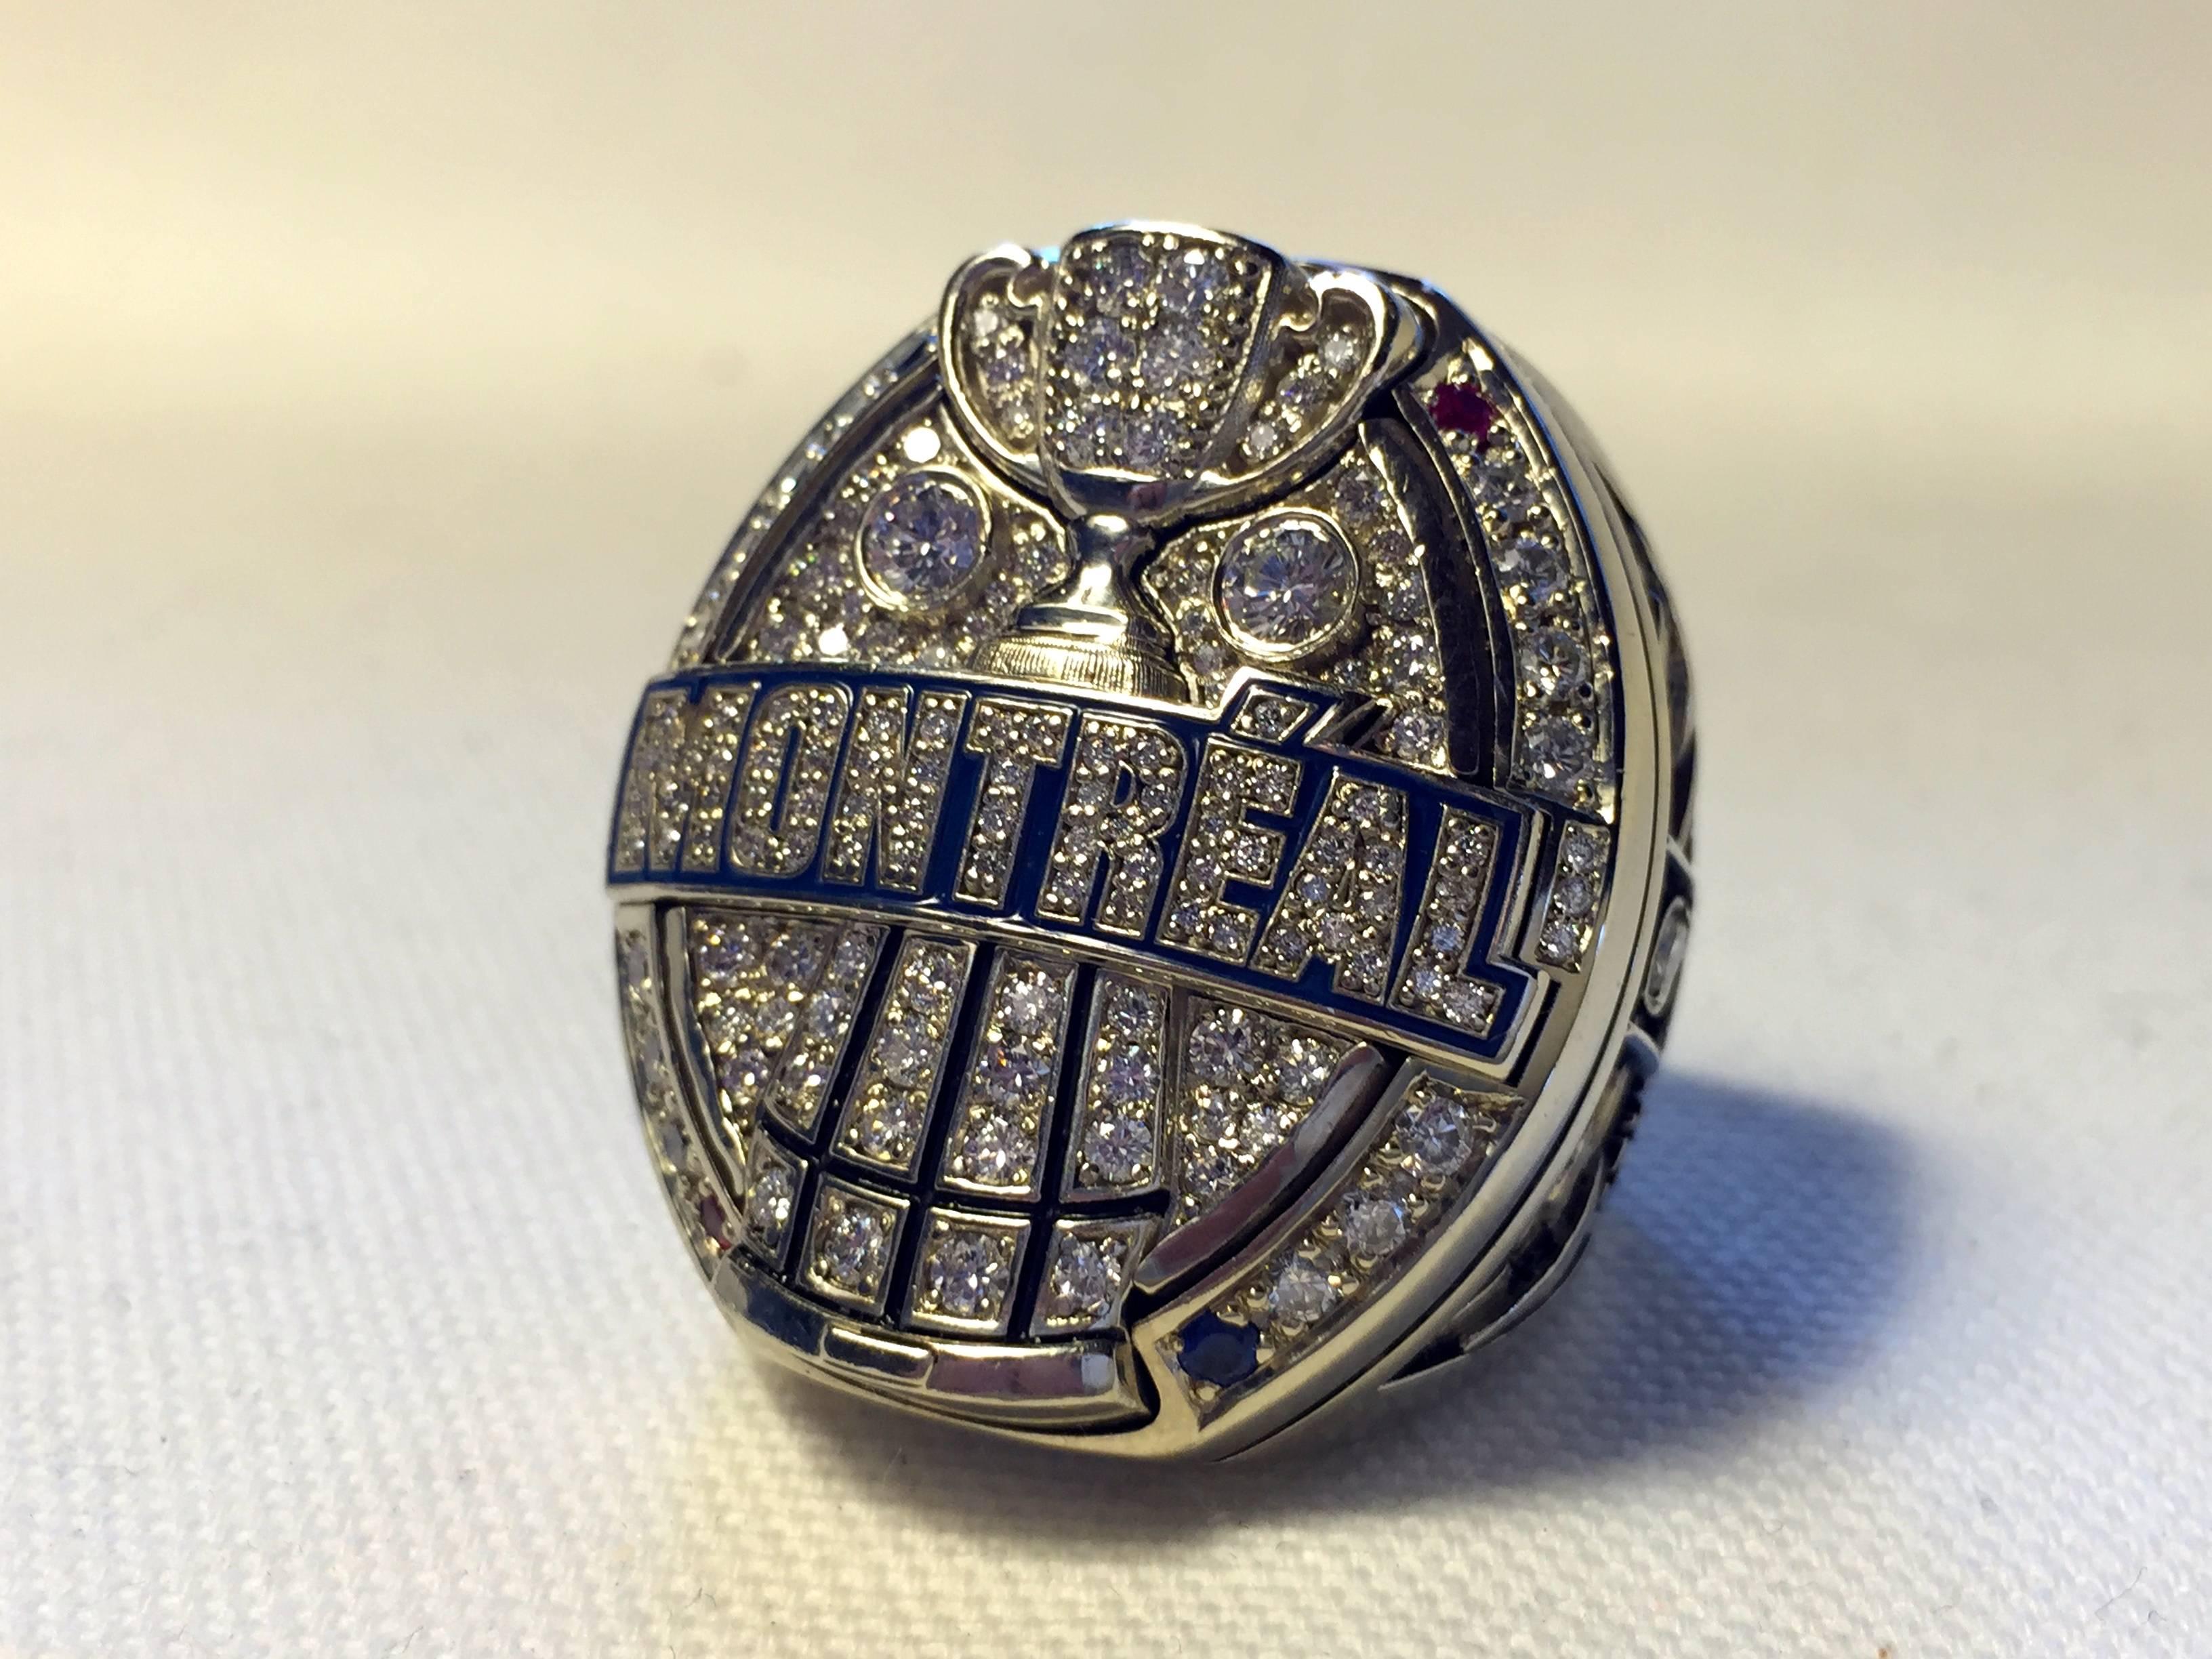 2009 Montreal Alouettes CFL Grey cup Players Championship ring. Made of 10-karat gold with all real high grade diamonds, Rubies, and Sapphires. Size 11.5, weighs a massive 77.8 grams makes this one of the largest championship rings ever produced..